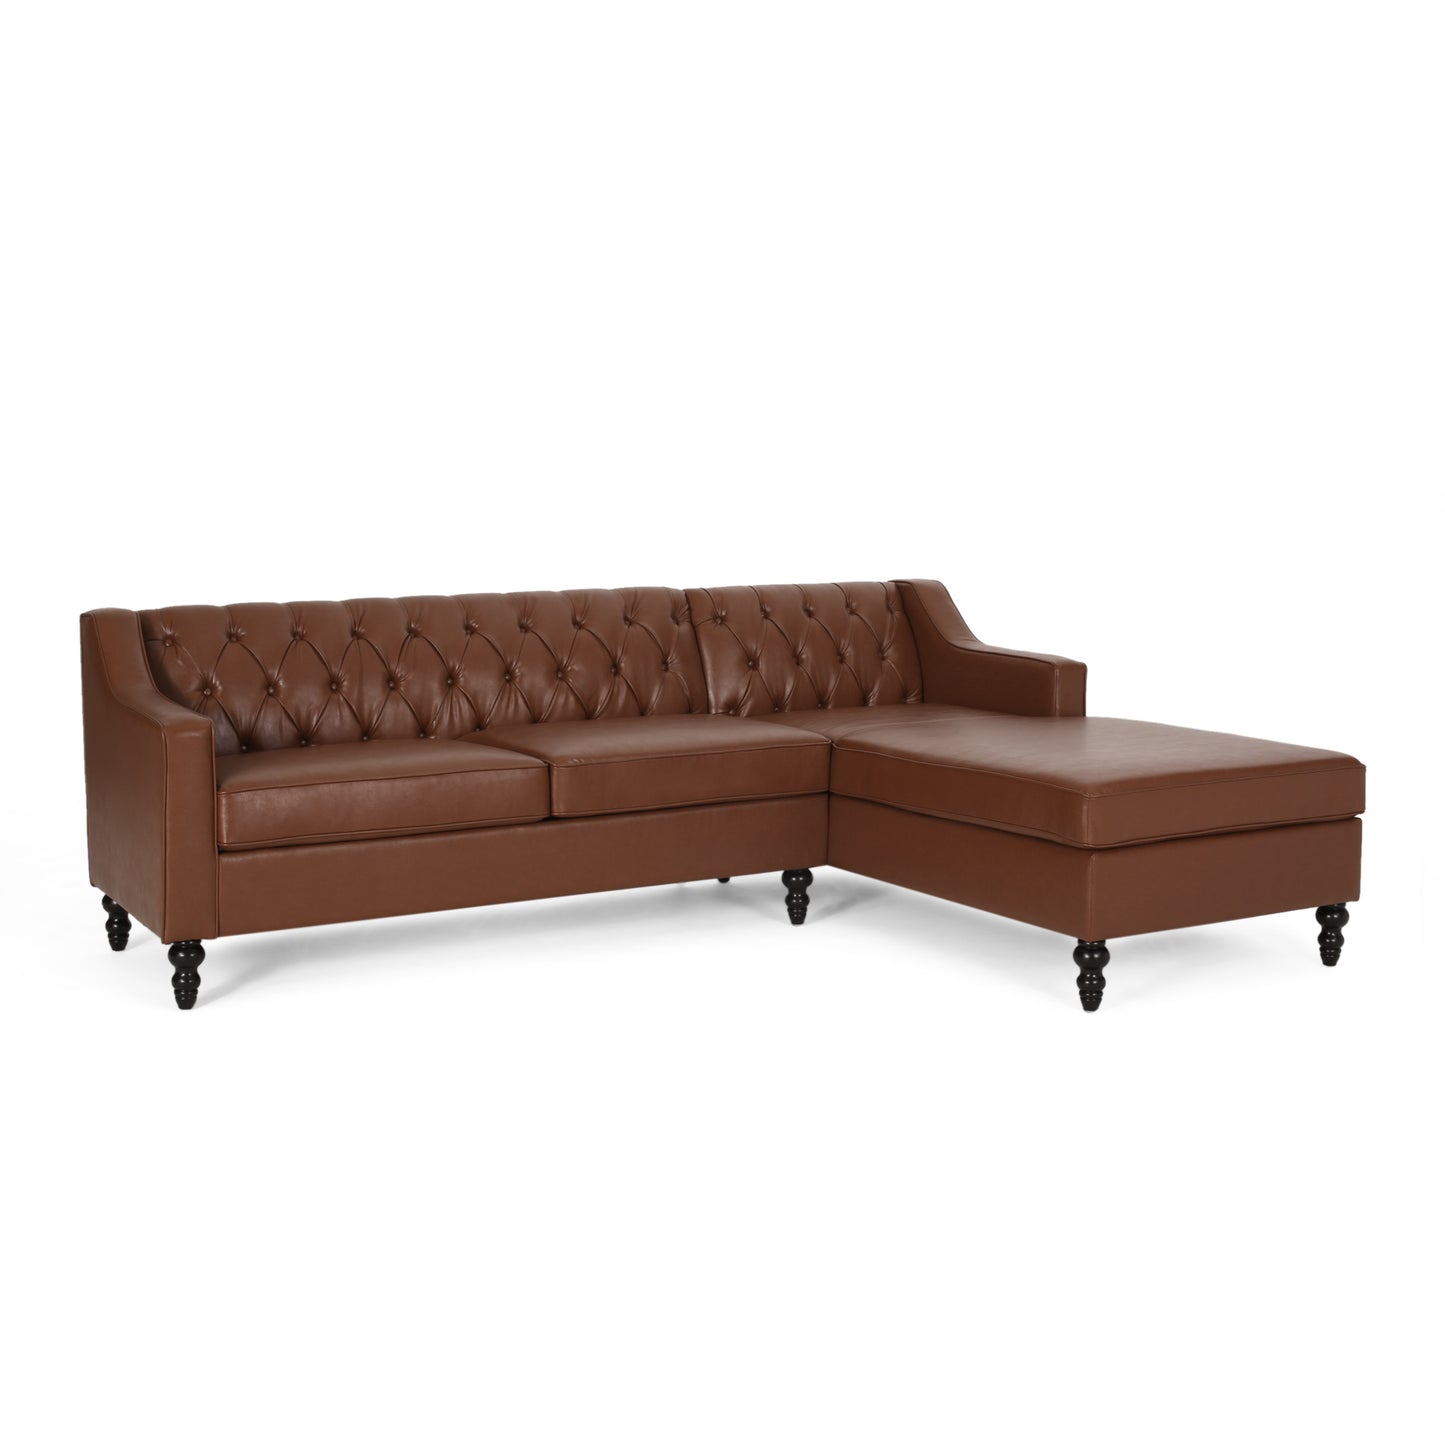 Bluewater Contemporary Tufted Chaise Sectional